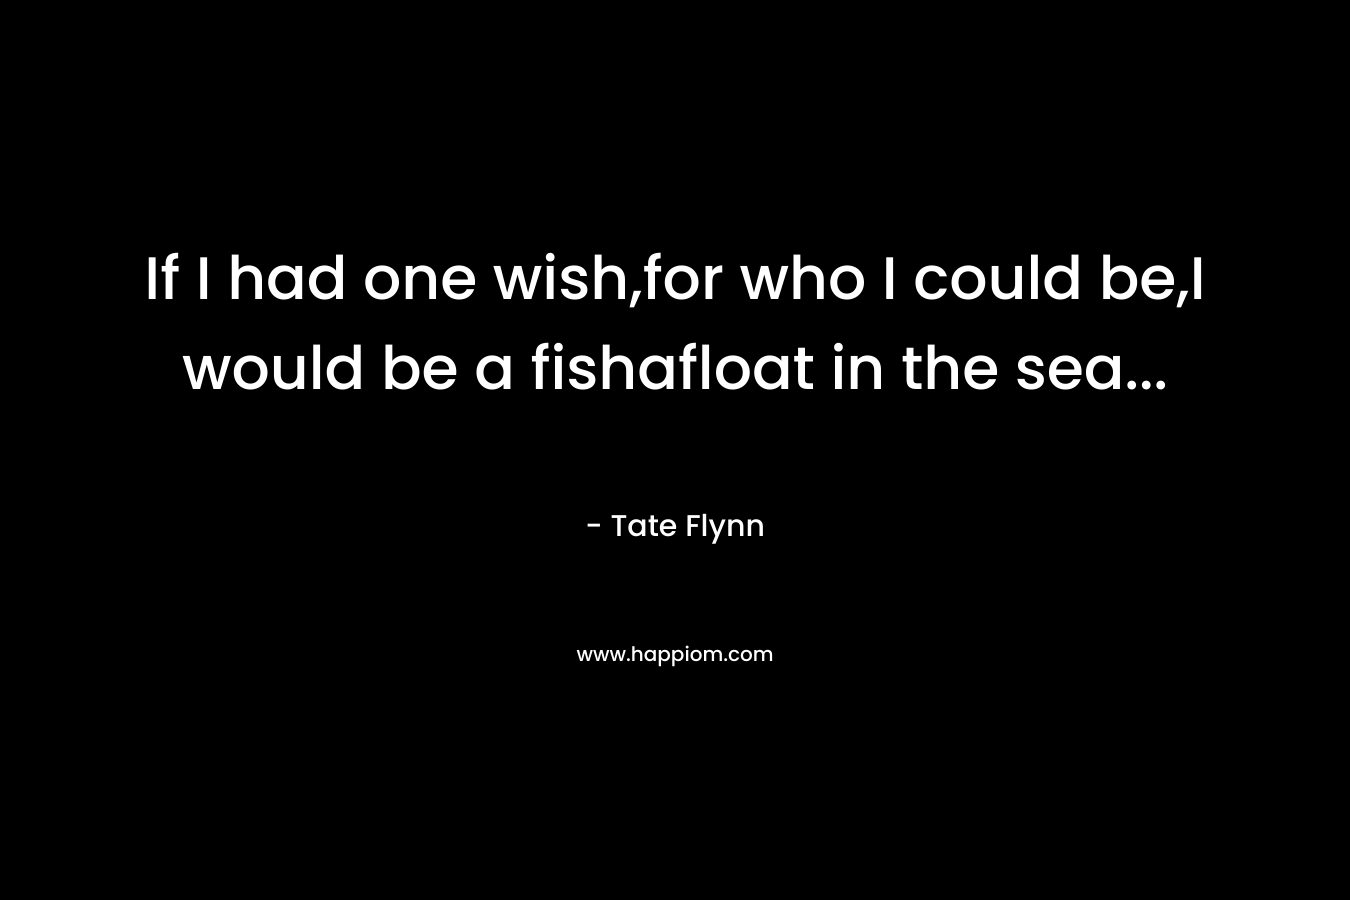 If I had one wish,for who I could be,I would be a fishafloat in the sea...